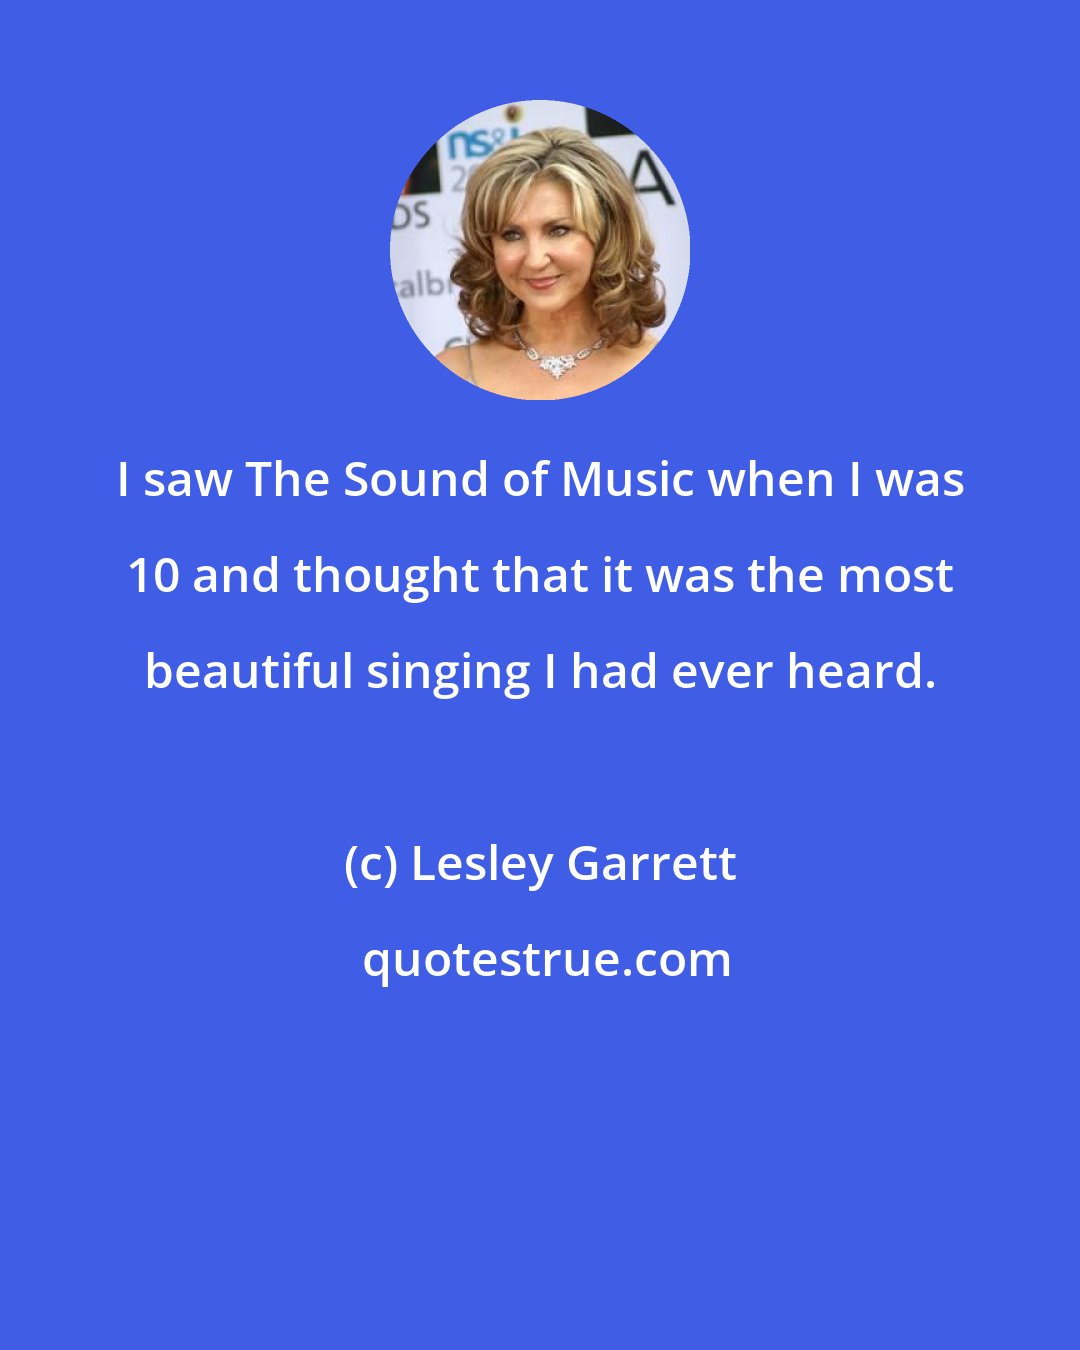 Lesley Garrett: I saw The Sound of Music when I was 10 and thought that it was the most beautiful singing I had ever heard.